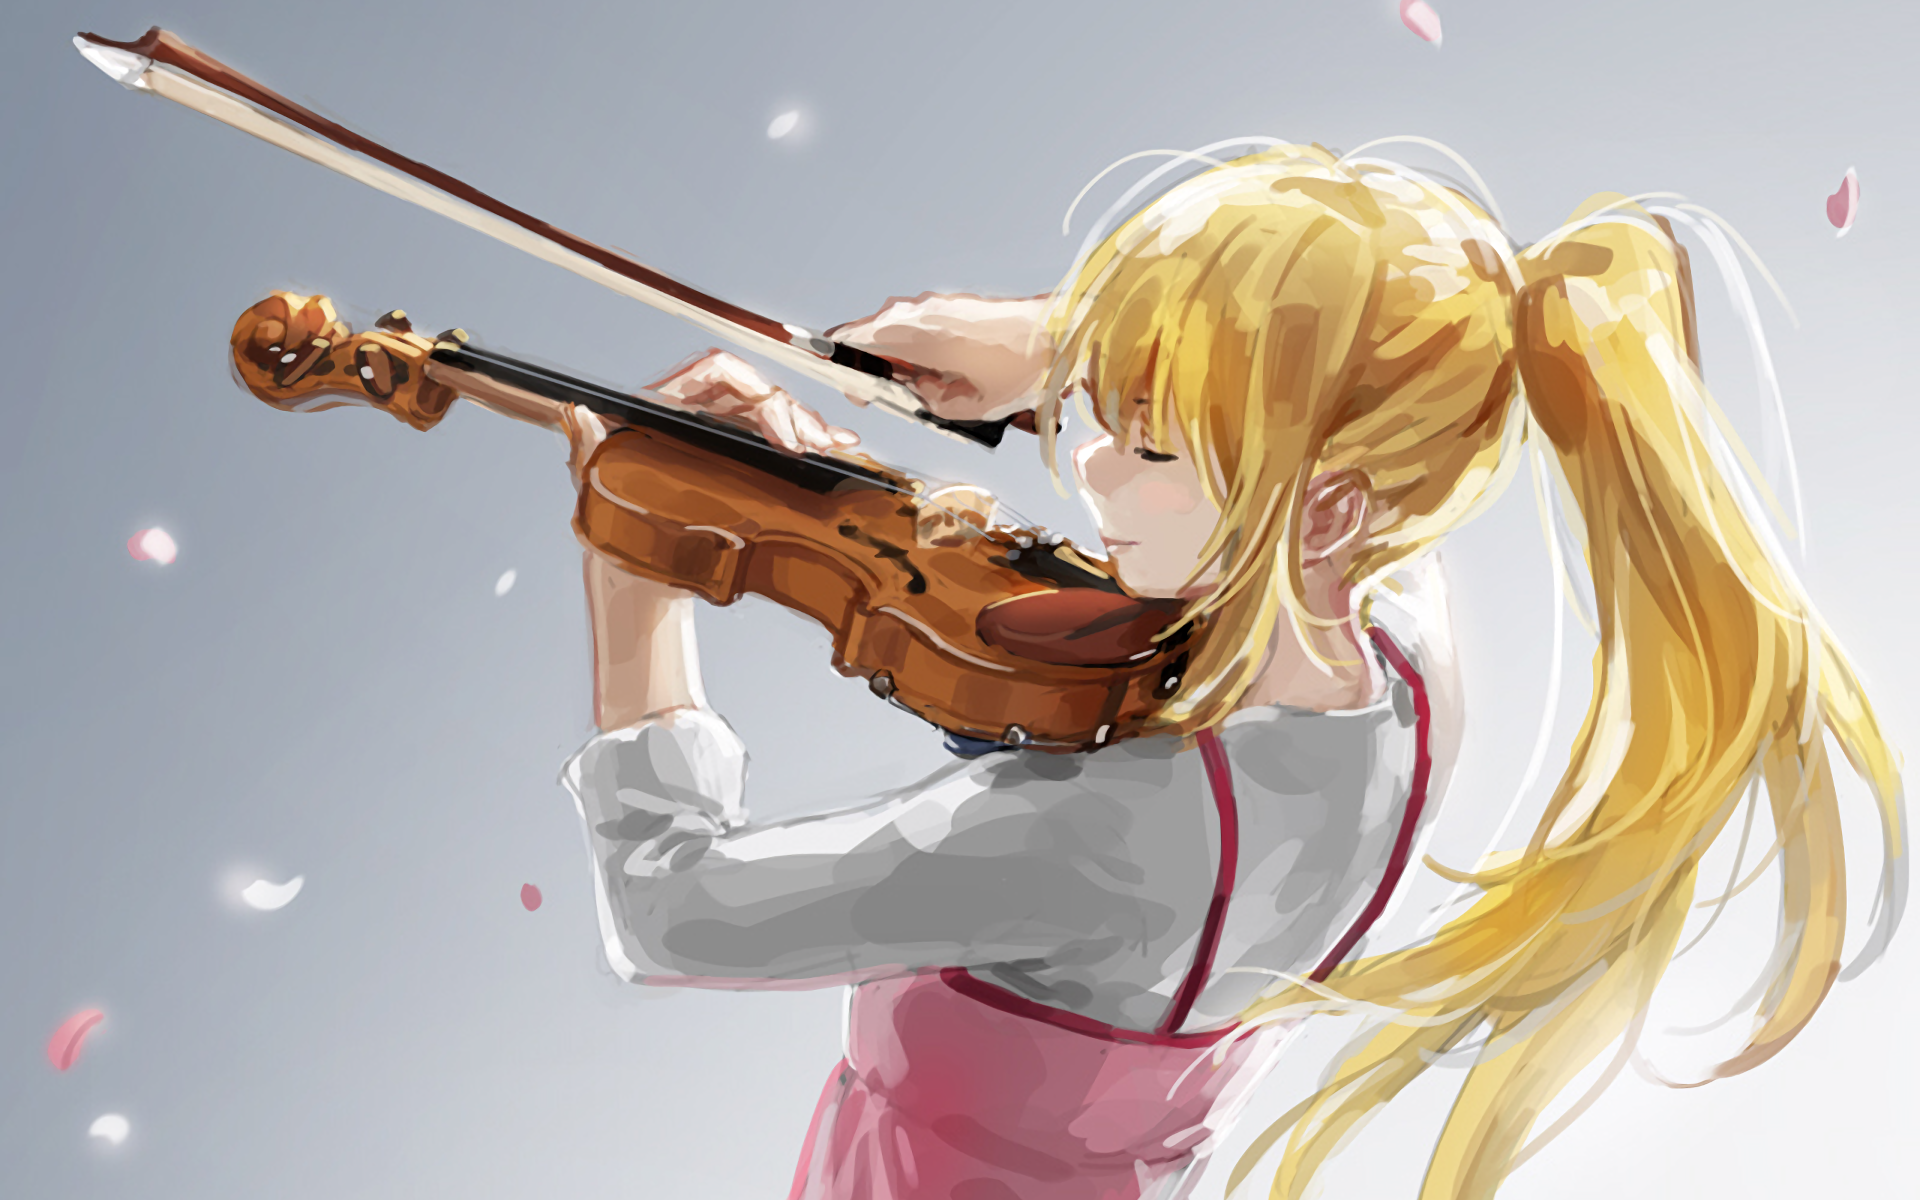 1920x1200 Your Lie In April Wallpaper Background Image. 